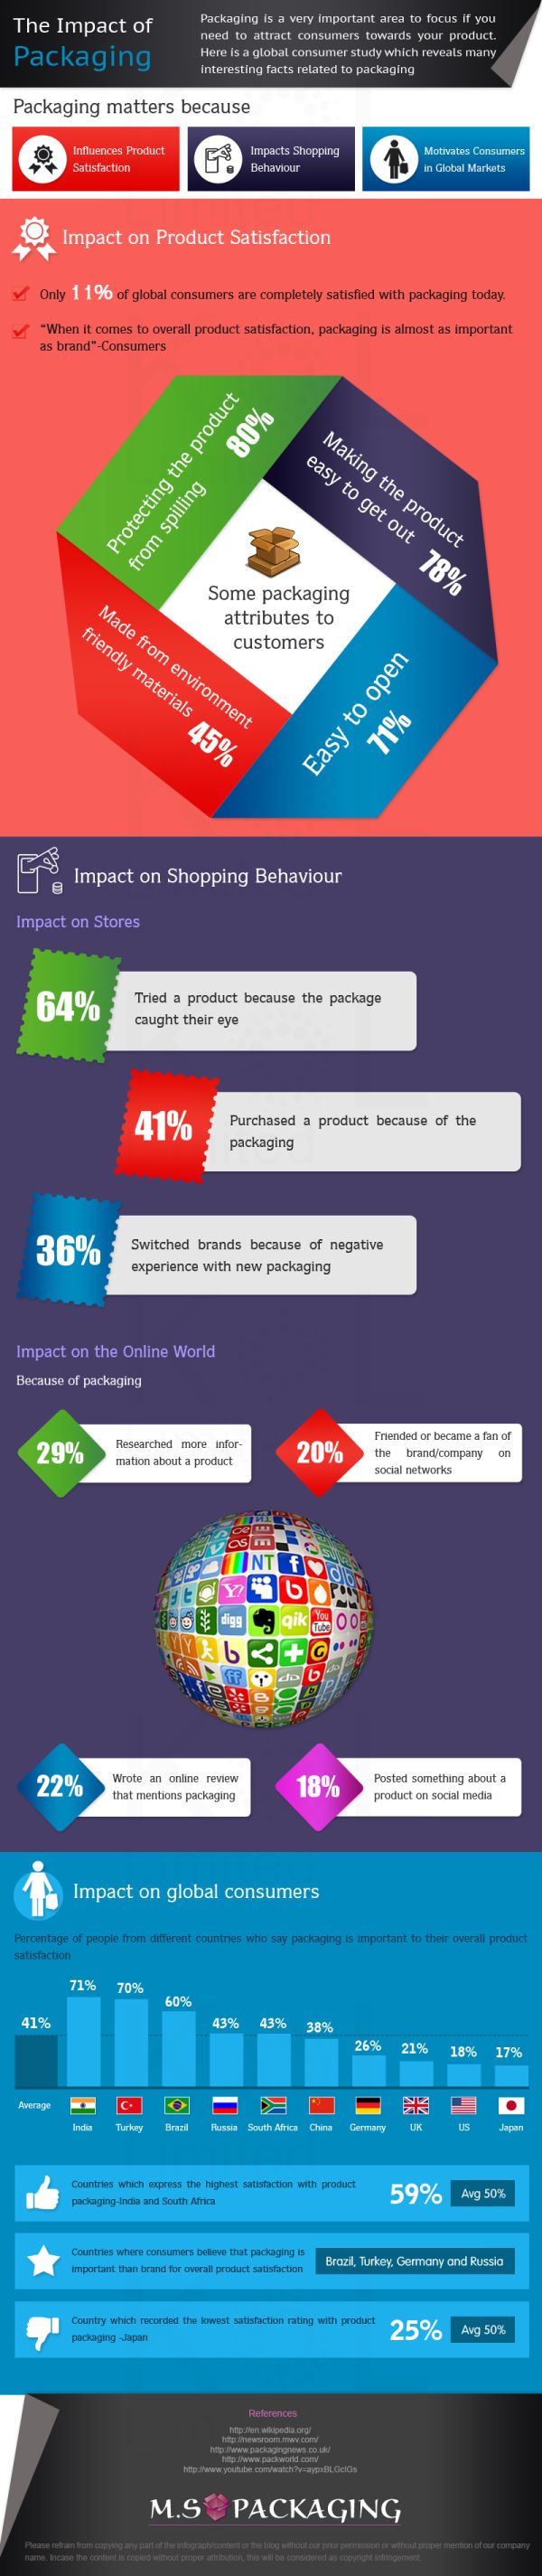 The Impact of Packaging